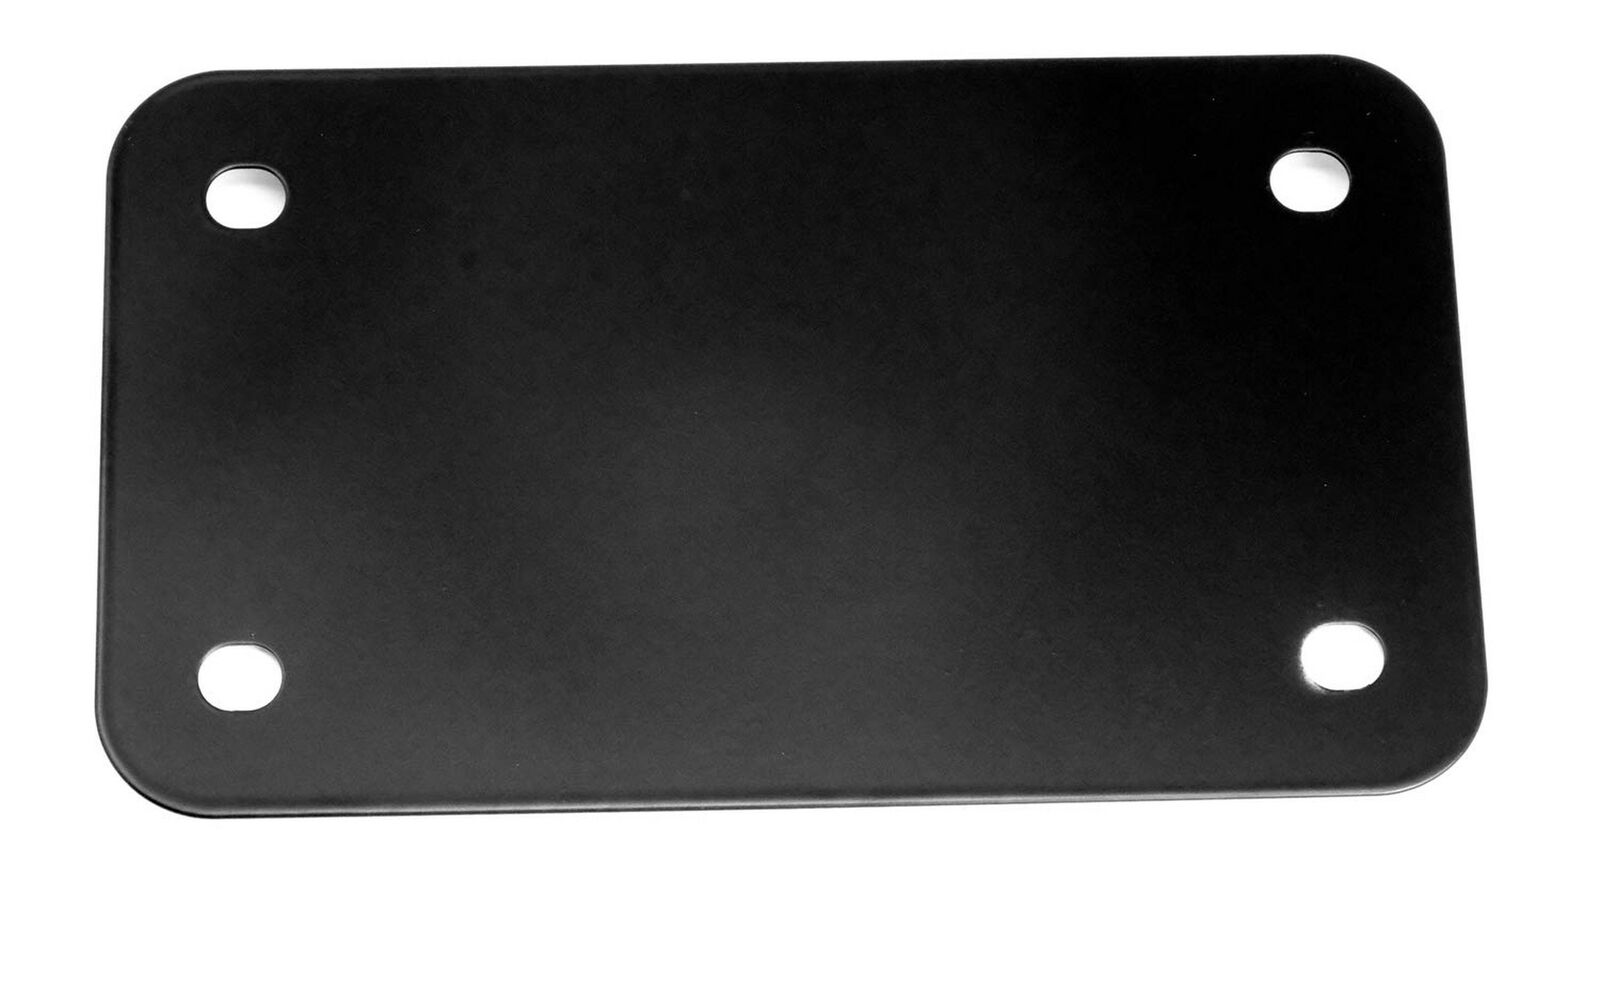 LFPartS Black Motorcycle License Plate Backing Reinforce Plate for Motorcycle...